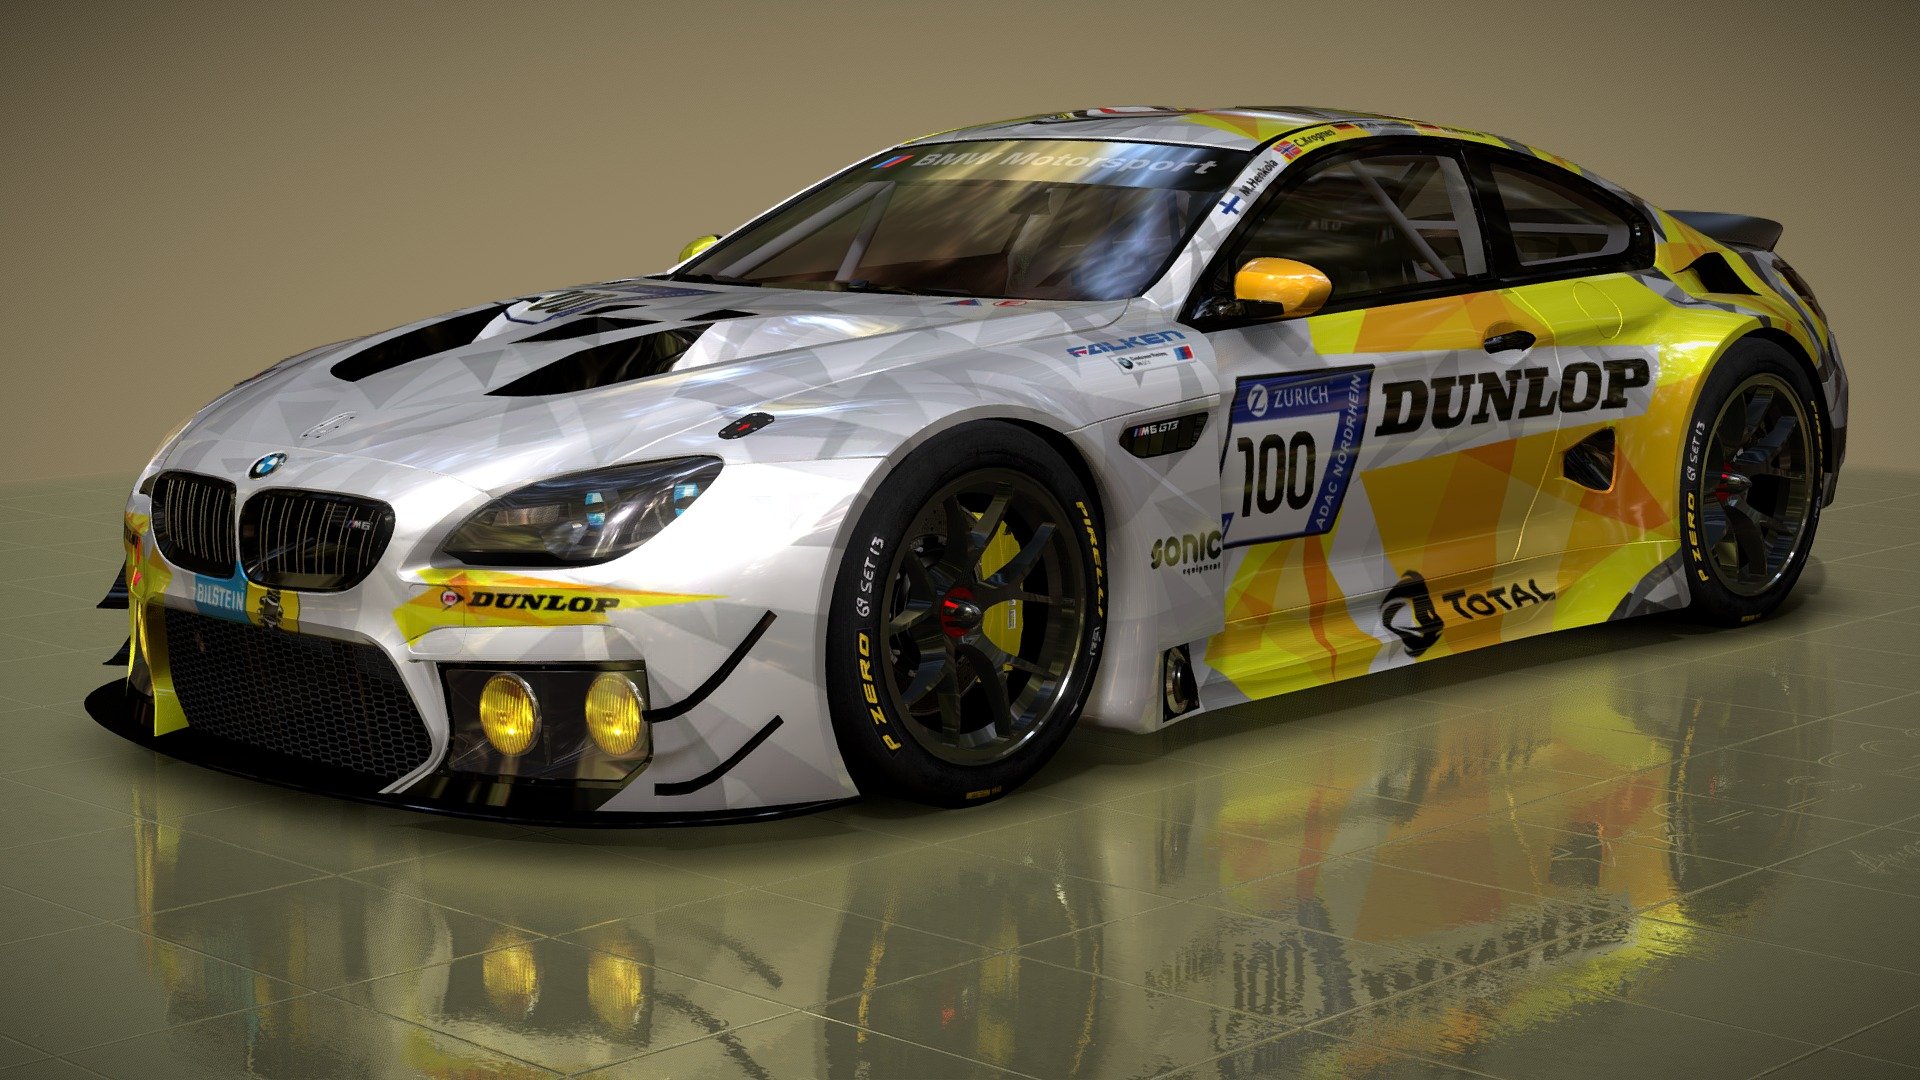 Just a slightly modified version




All rights to the model belong to its original authors.

This version is intended for demonstrtion purposes.

Upon review, you agree to delete the file from your PC/laptop.

In case of violation of the rules of demonstrtion distribution

or unfair use and sale of this model - you are responsible!




Based on the model from - Real Racing 3

Polycount - midpoly with some hd details

Geometry edited and modified - Alex.Ka.

Textures: Real Racing 3, Alex.Ka.

Special original &lsquo;'AL's CARS'' license plate texture By Alex.Ka.

New spoiler

New brakes

New foglights

Individual HD decal-texture for windows

Added suspension - wheels not hanging in the void (close by suspension)


Prepared for Sketchfab by Alex.Ka.

09.08.2023 - BMW M6 GT3 2018 💛 - Download Free 3D model by ᗩᒪE᙭. Kᗩ.🚗 (@Alex.Ka.) 3d model